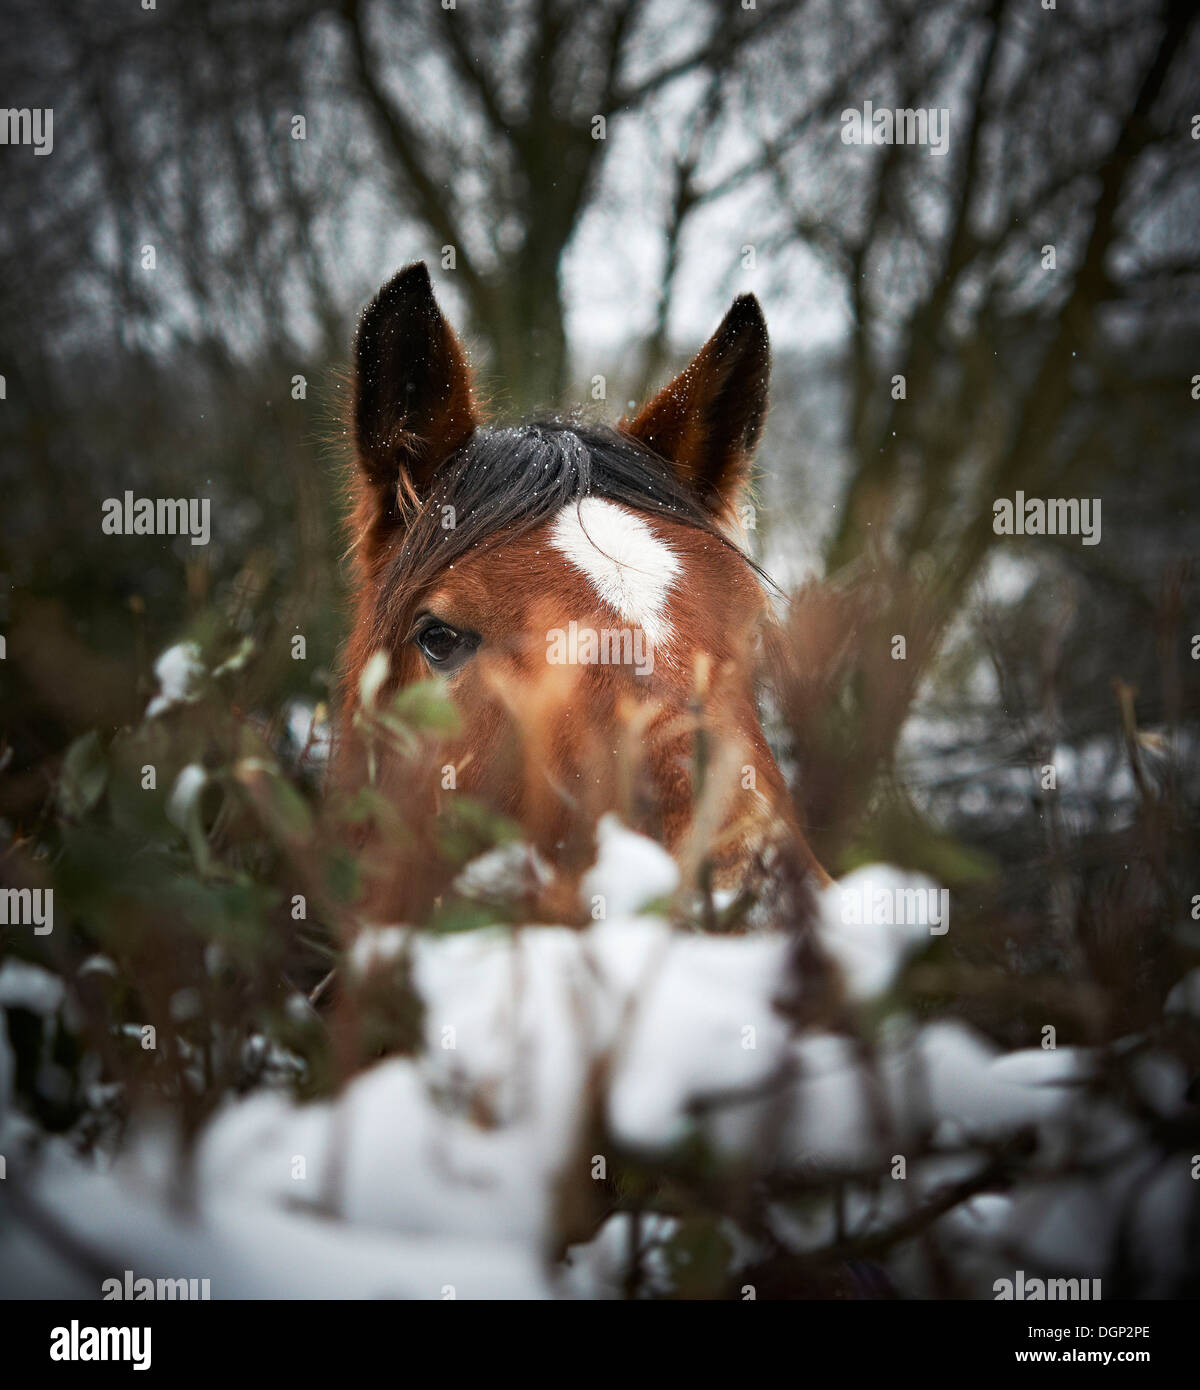 A Horse looking over a snow covered hedge, with pricked up ears Stock Photo